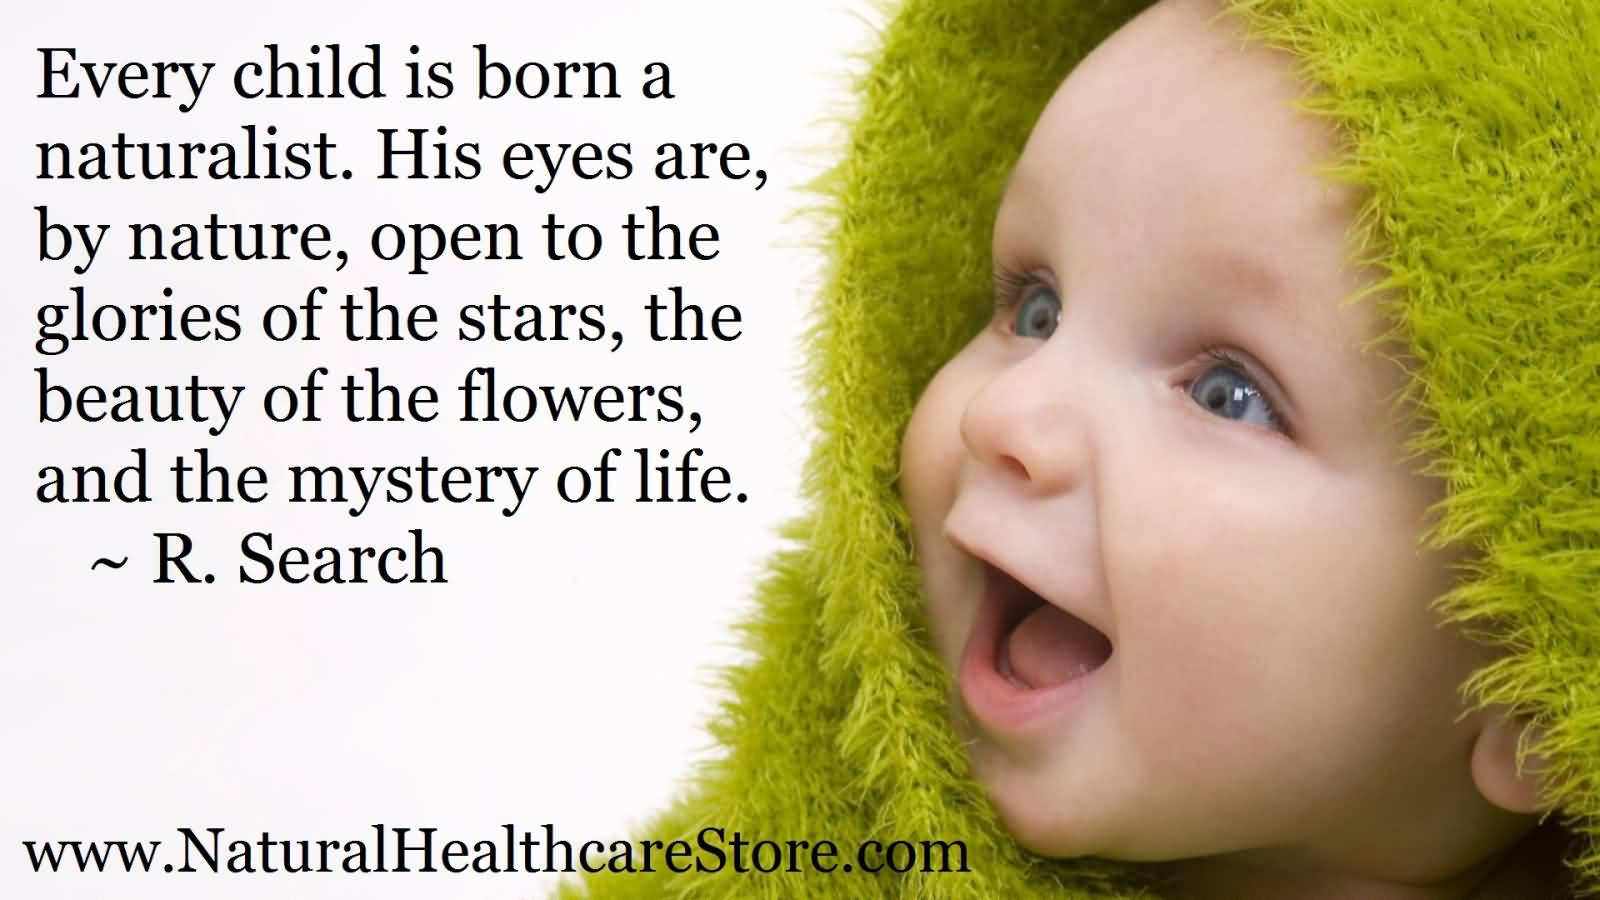 Every child is born a naturalist His eyes are by nature open to